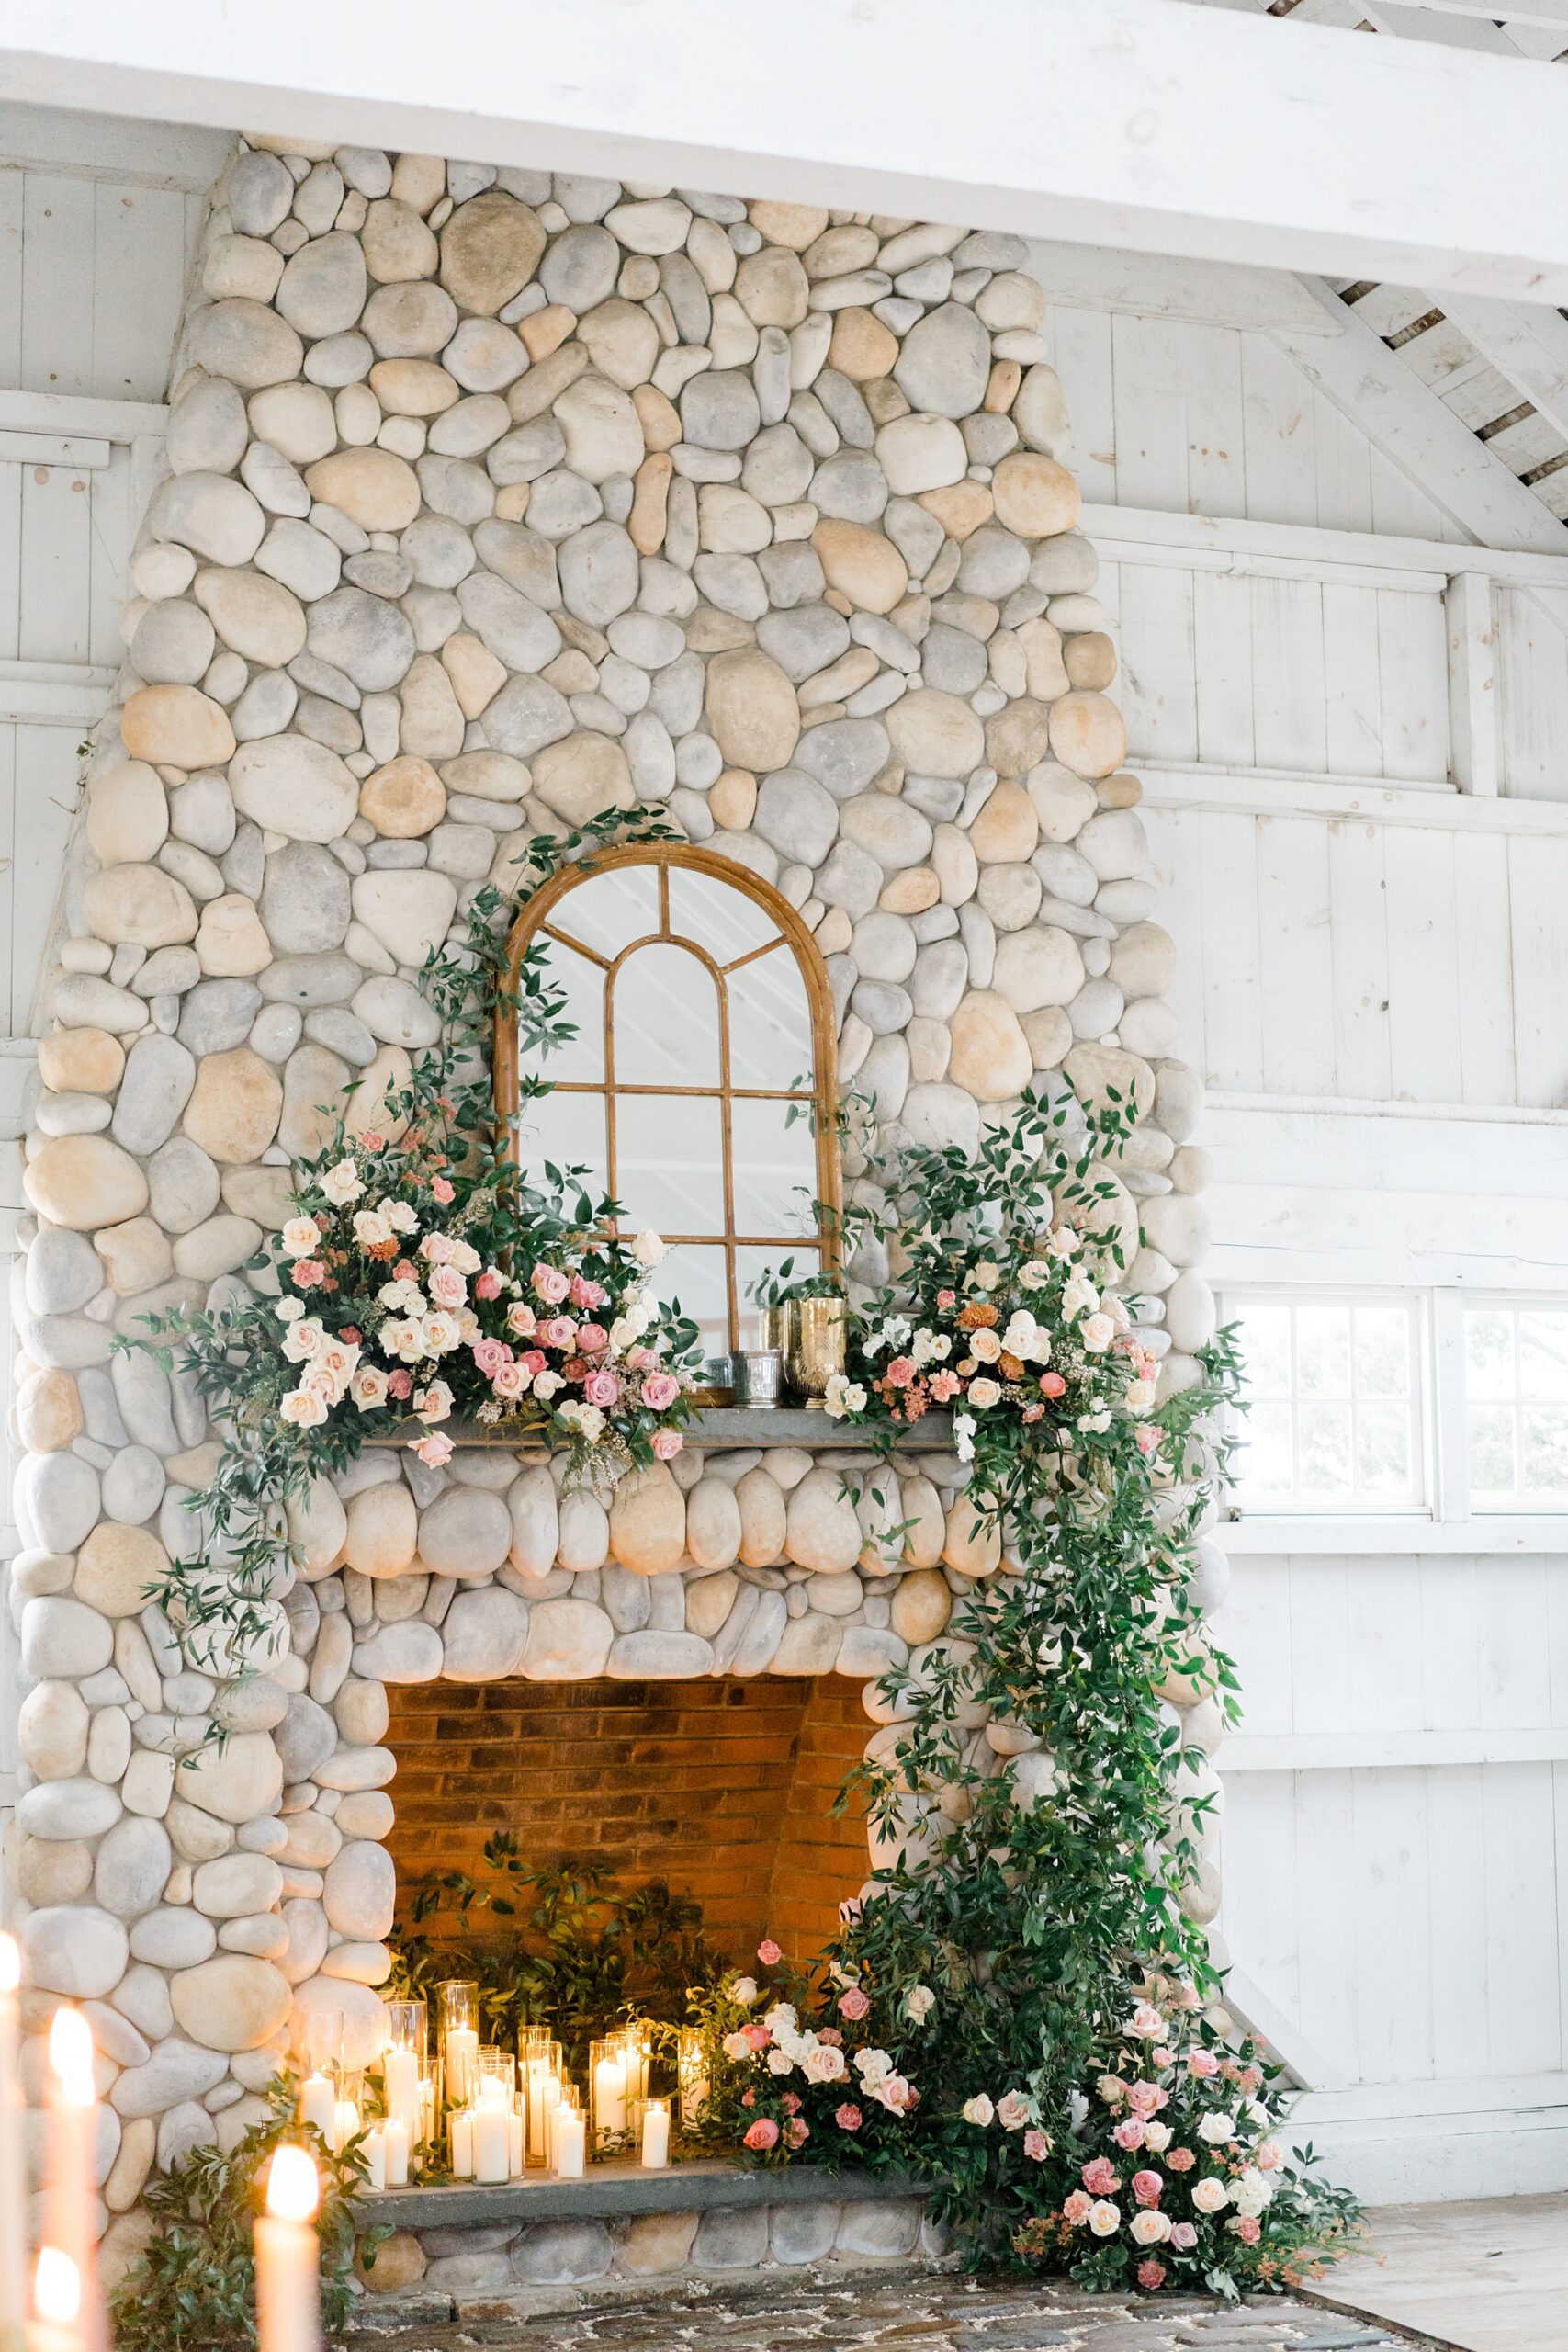 wedding details from Boathouse Chapel at Bonnet Island | Styled Wedding Shoot